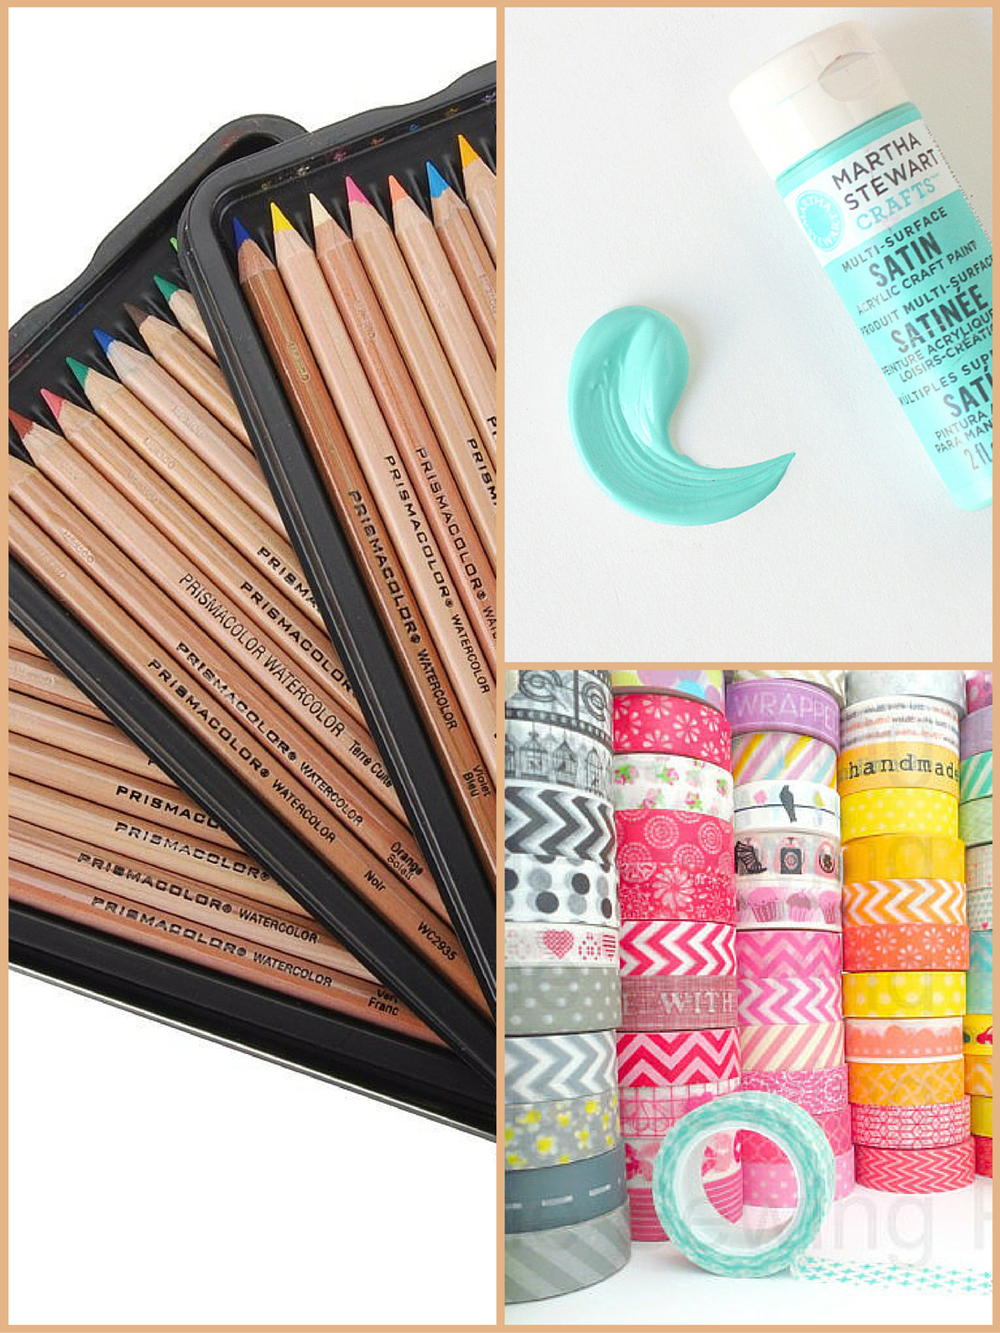 SHOPPING GUIDE: My 10 Must-Have Art Supplies To Jumpstart Your Creativity